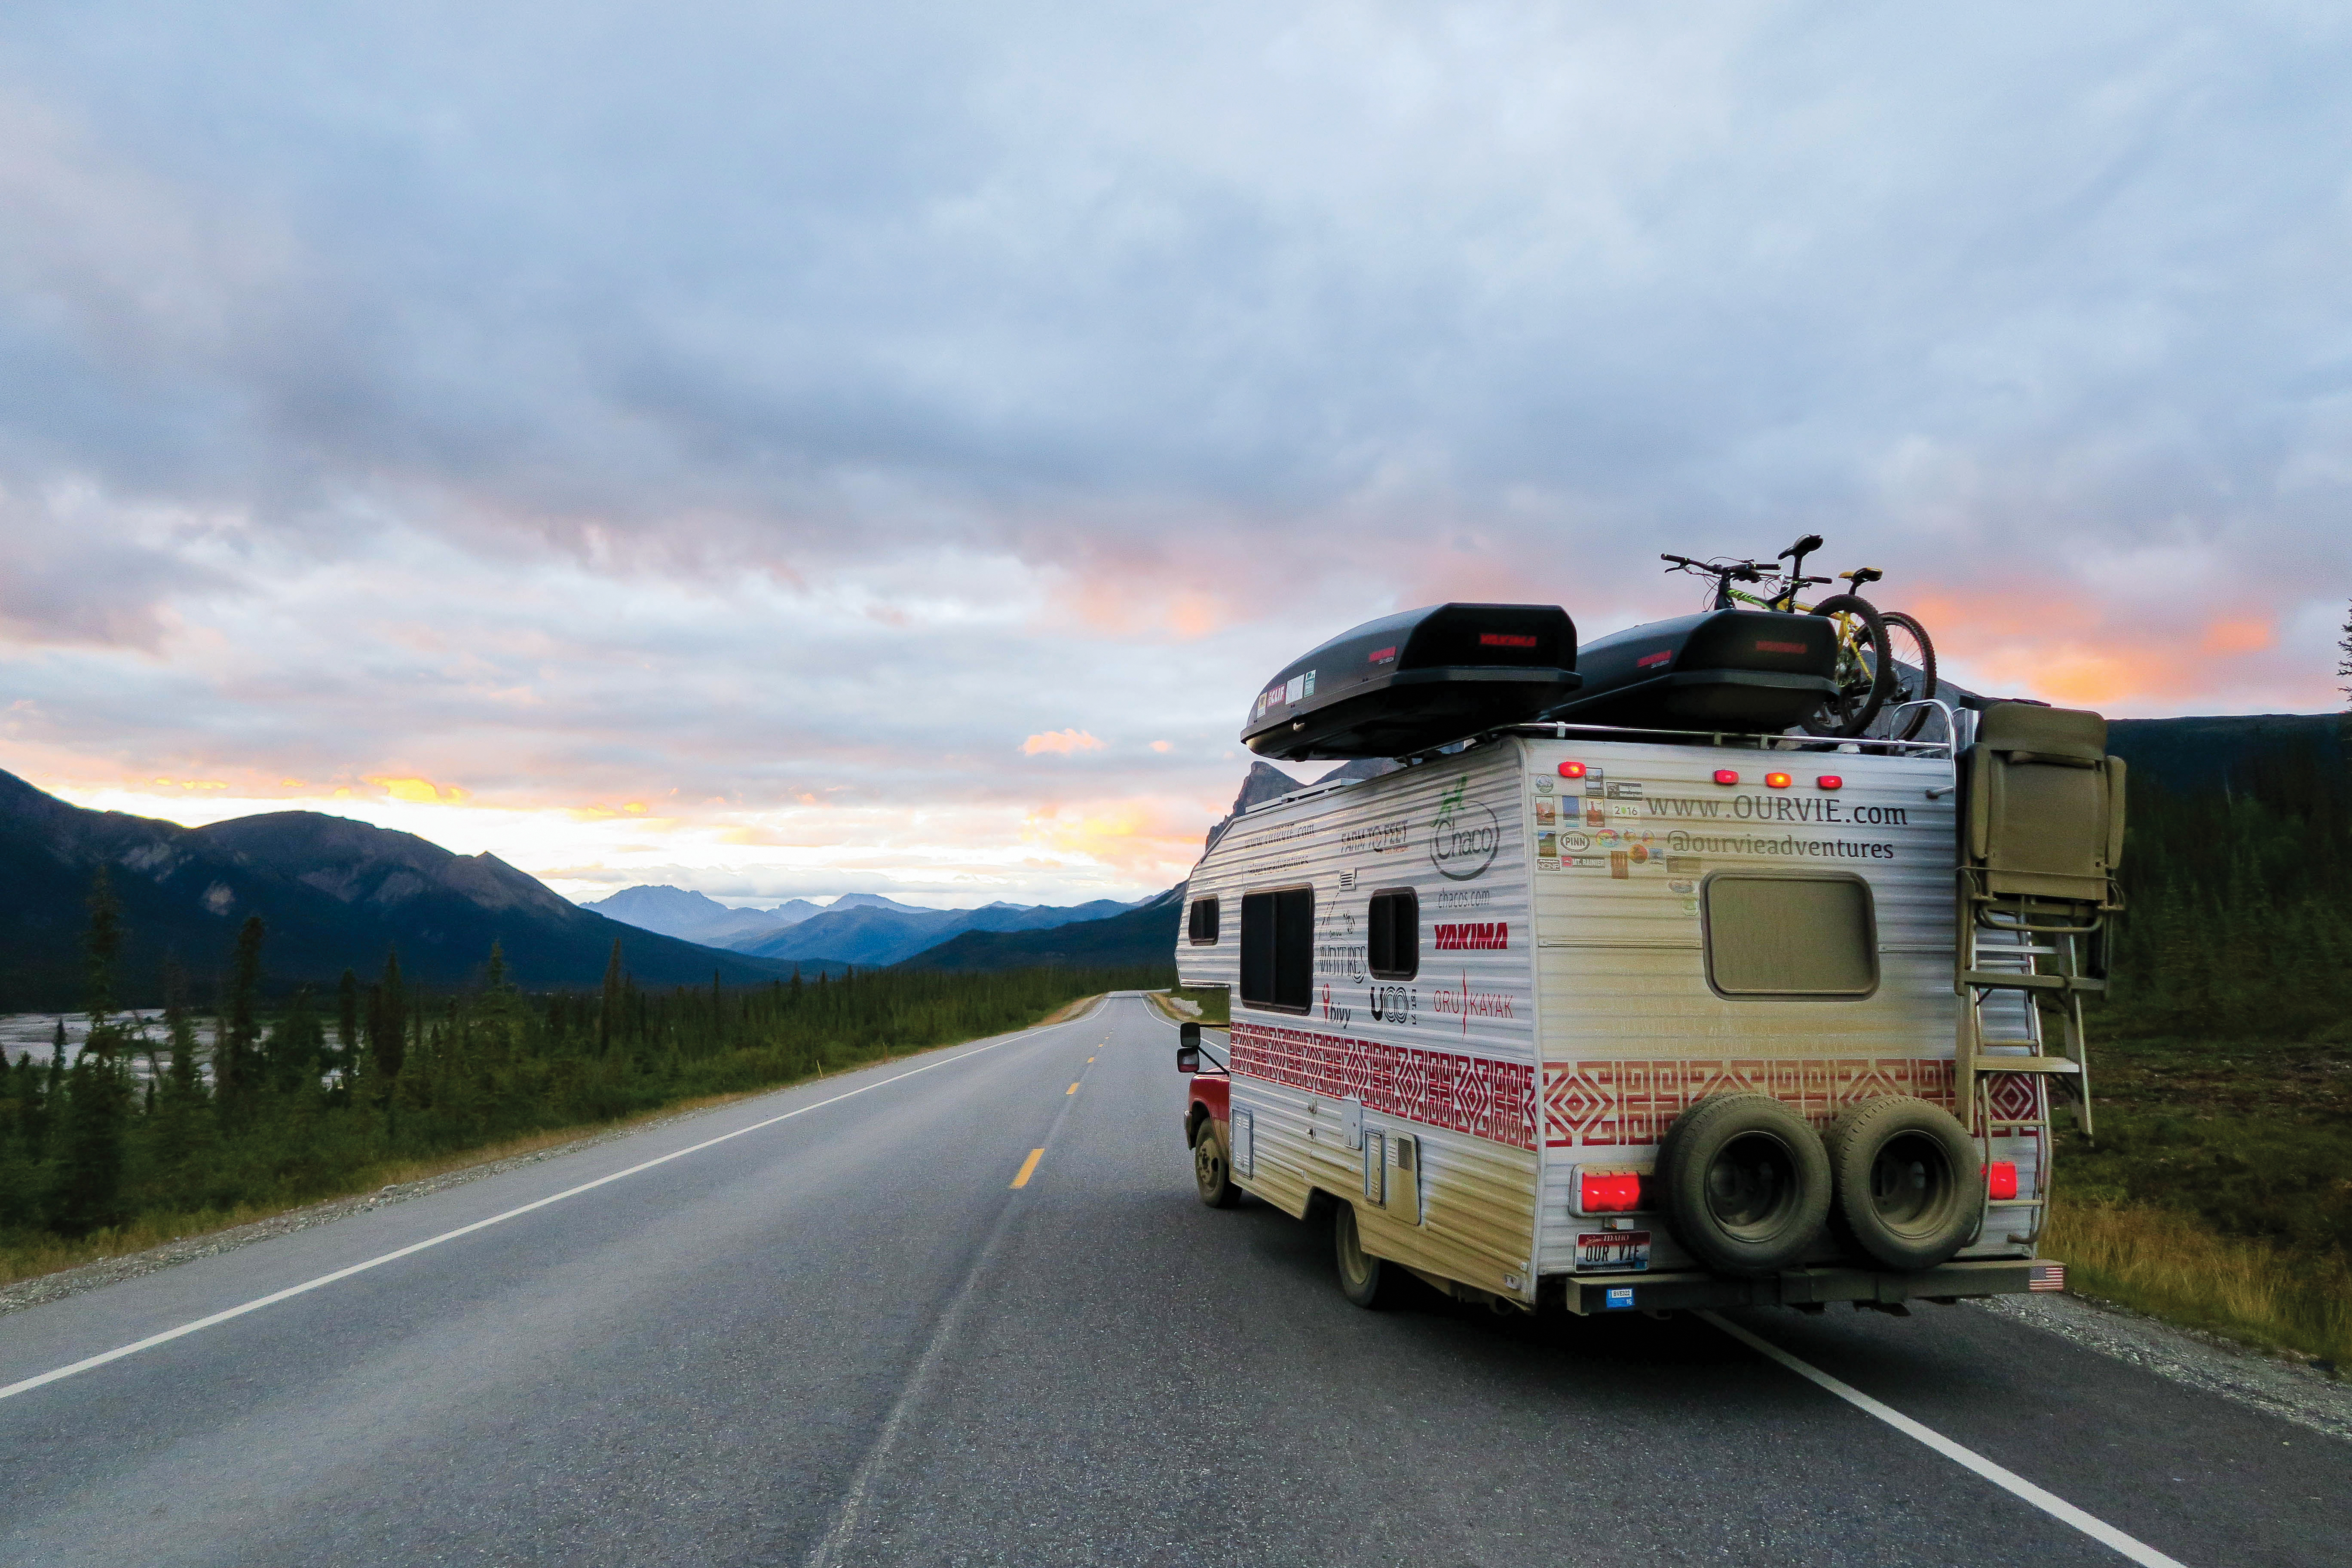 A view of the Hofman's motor home on the road in Alaska.